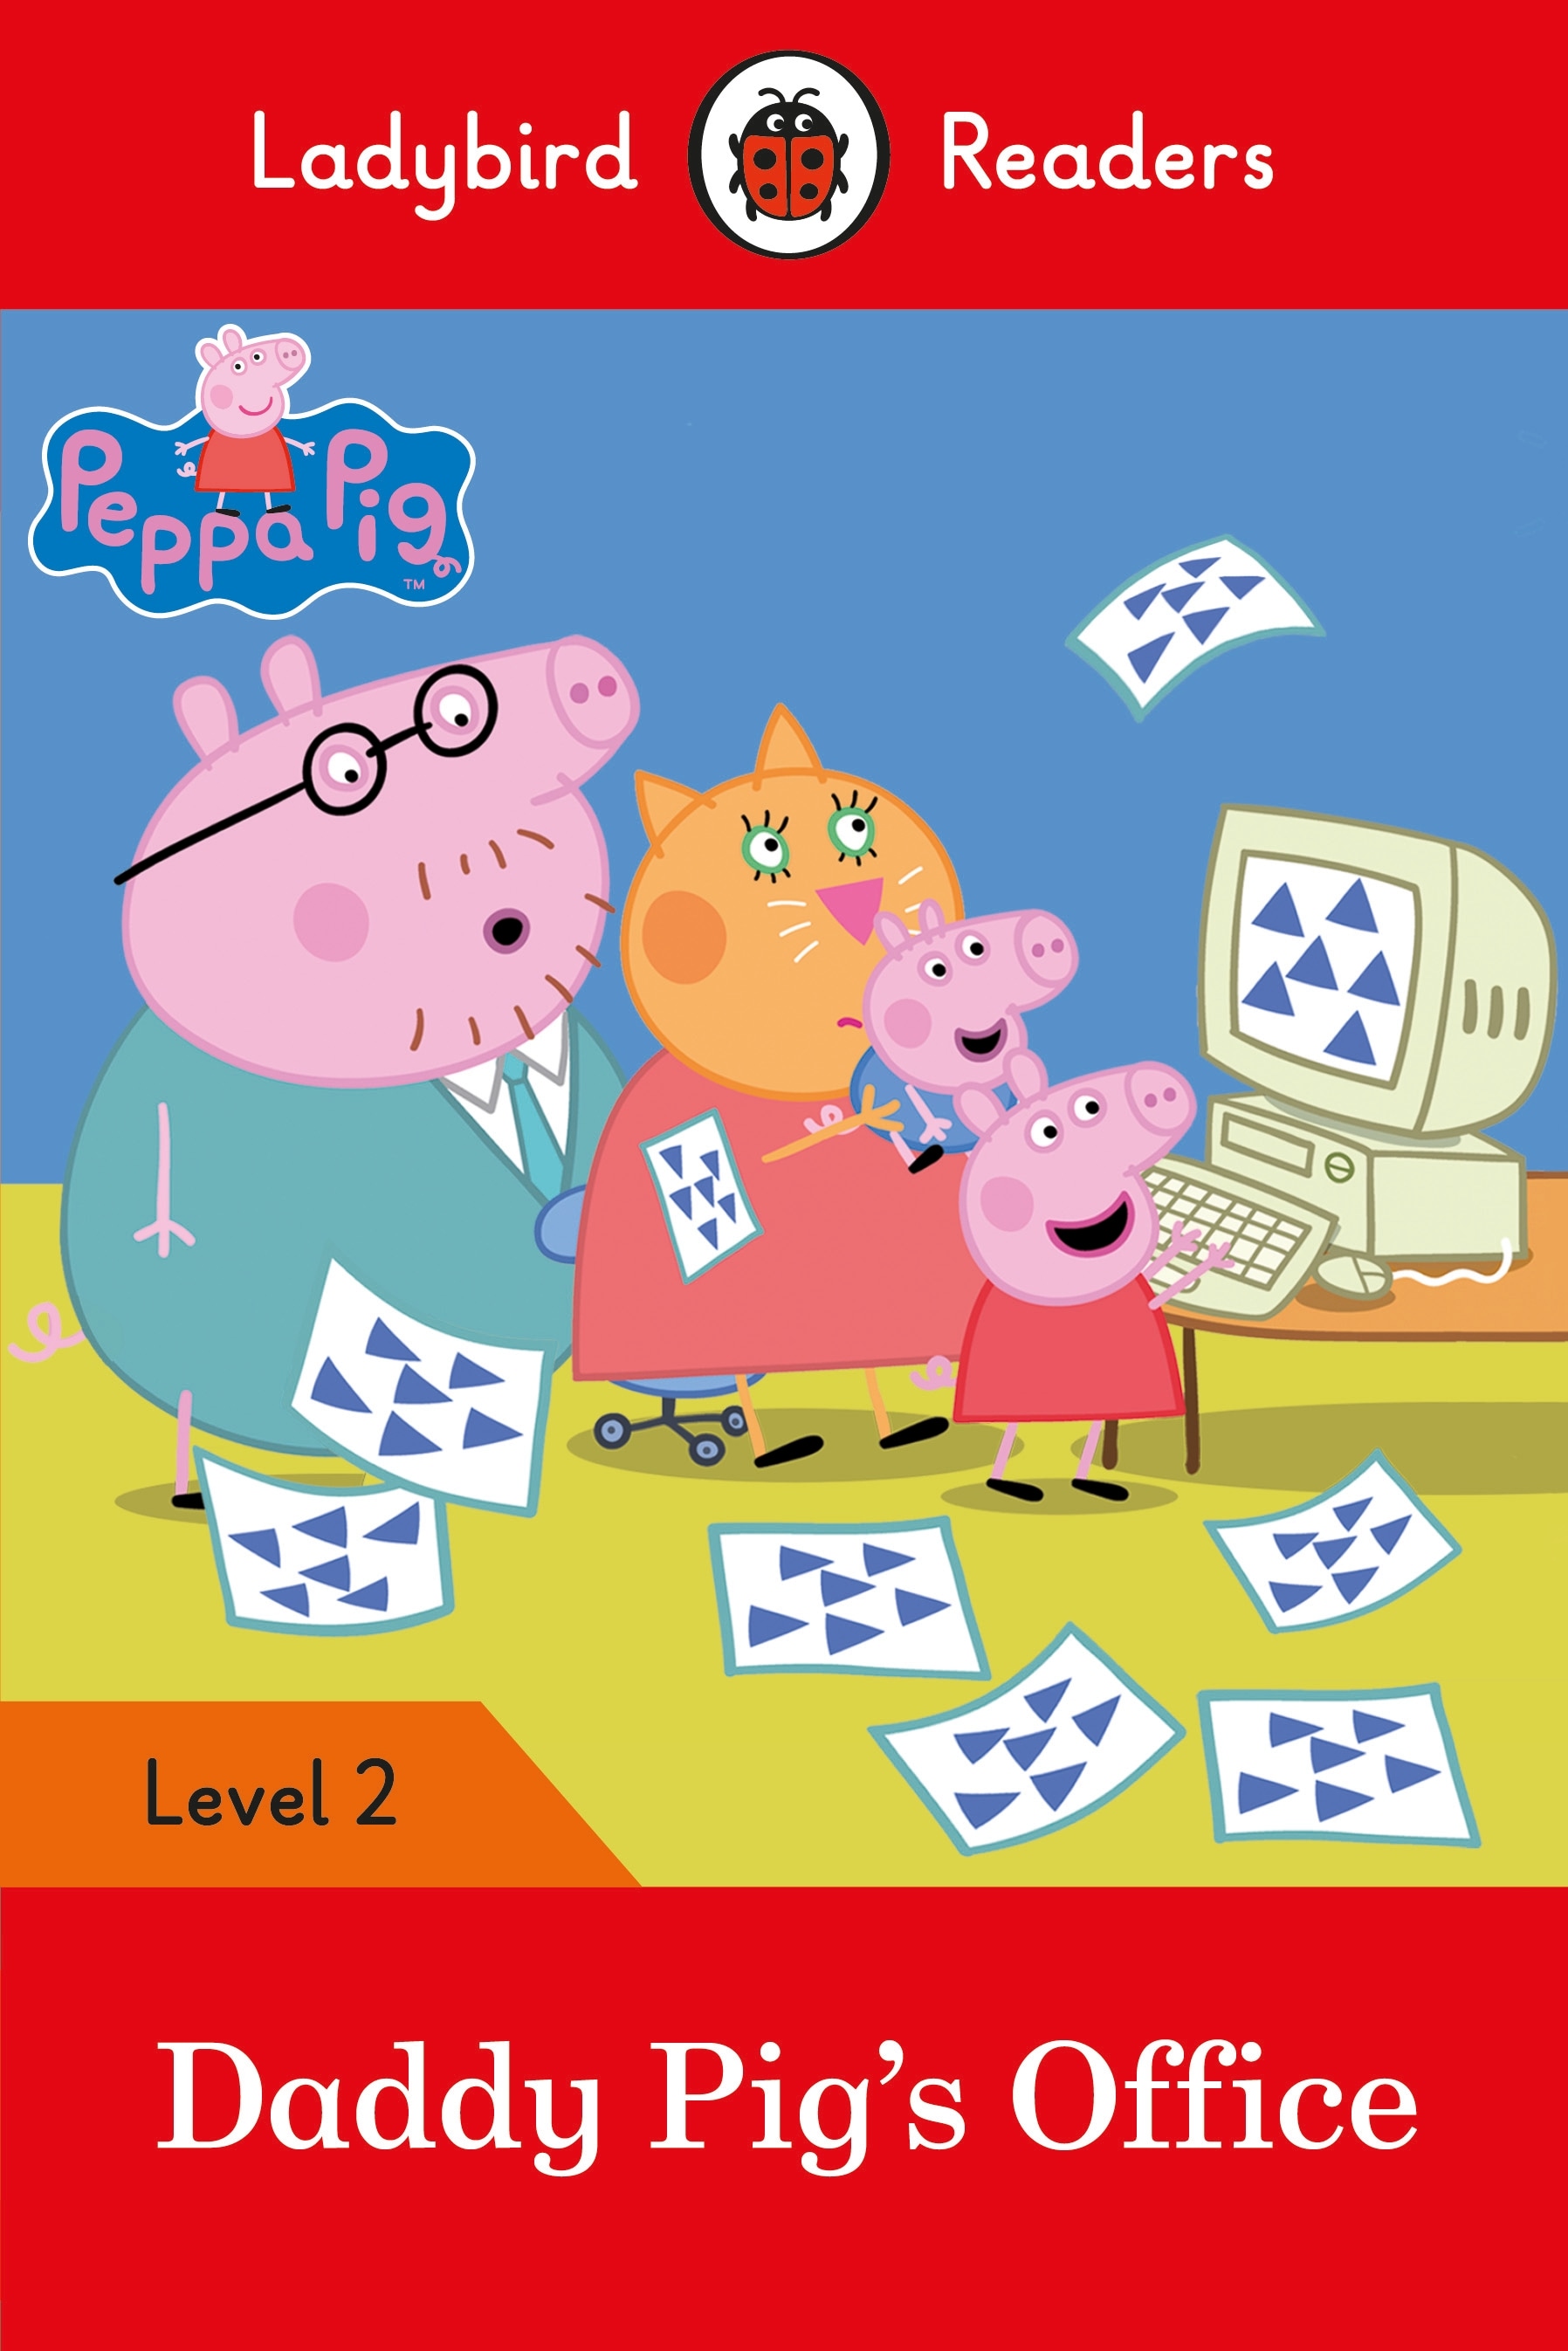 Book “Peppa Pig: Daddy Pig's Office - Ladybird Readers Level 2” by Ladybird, Peppa Pig — July 6, 2017